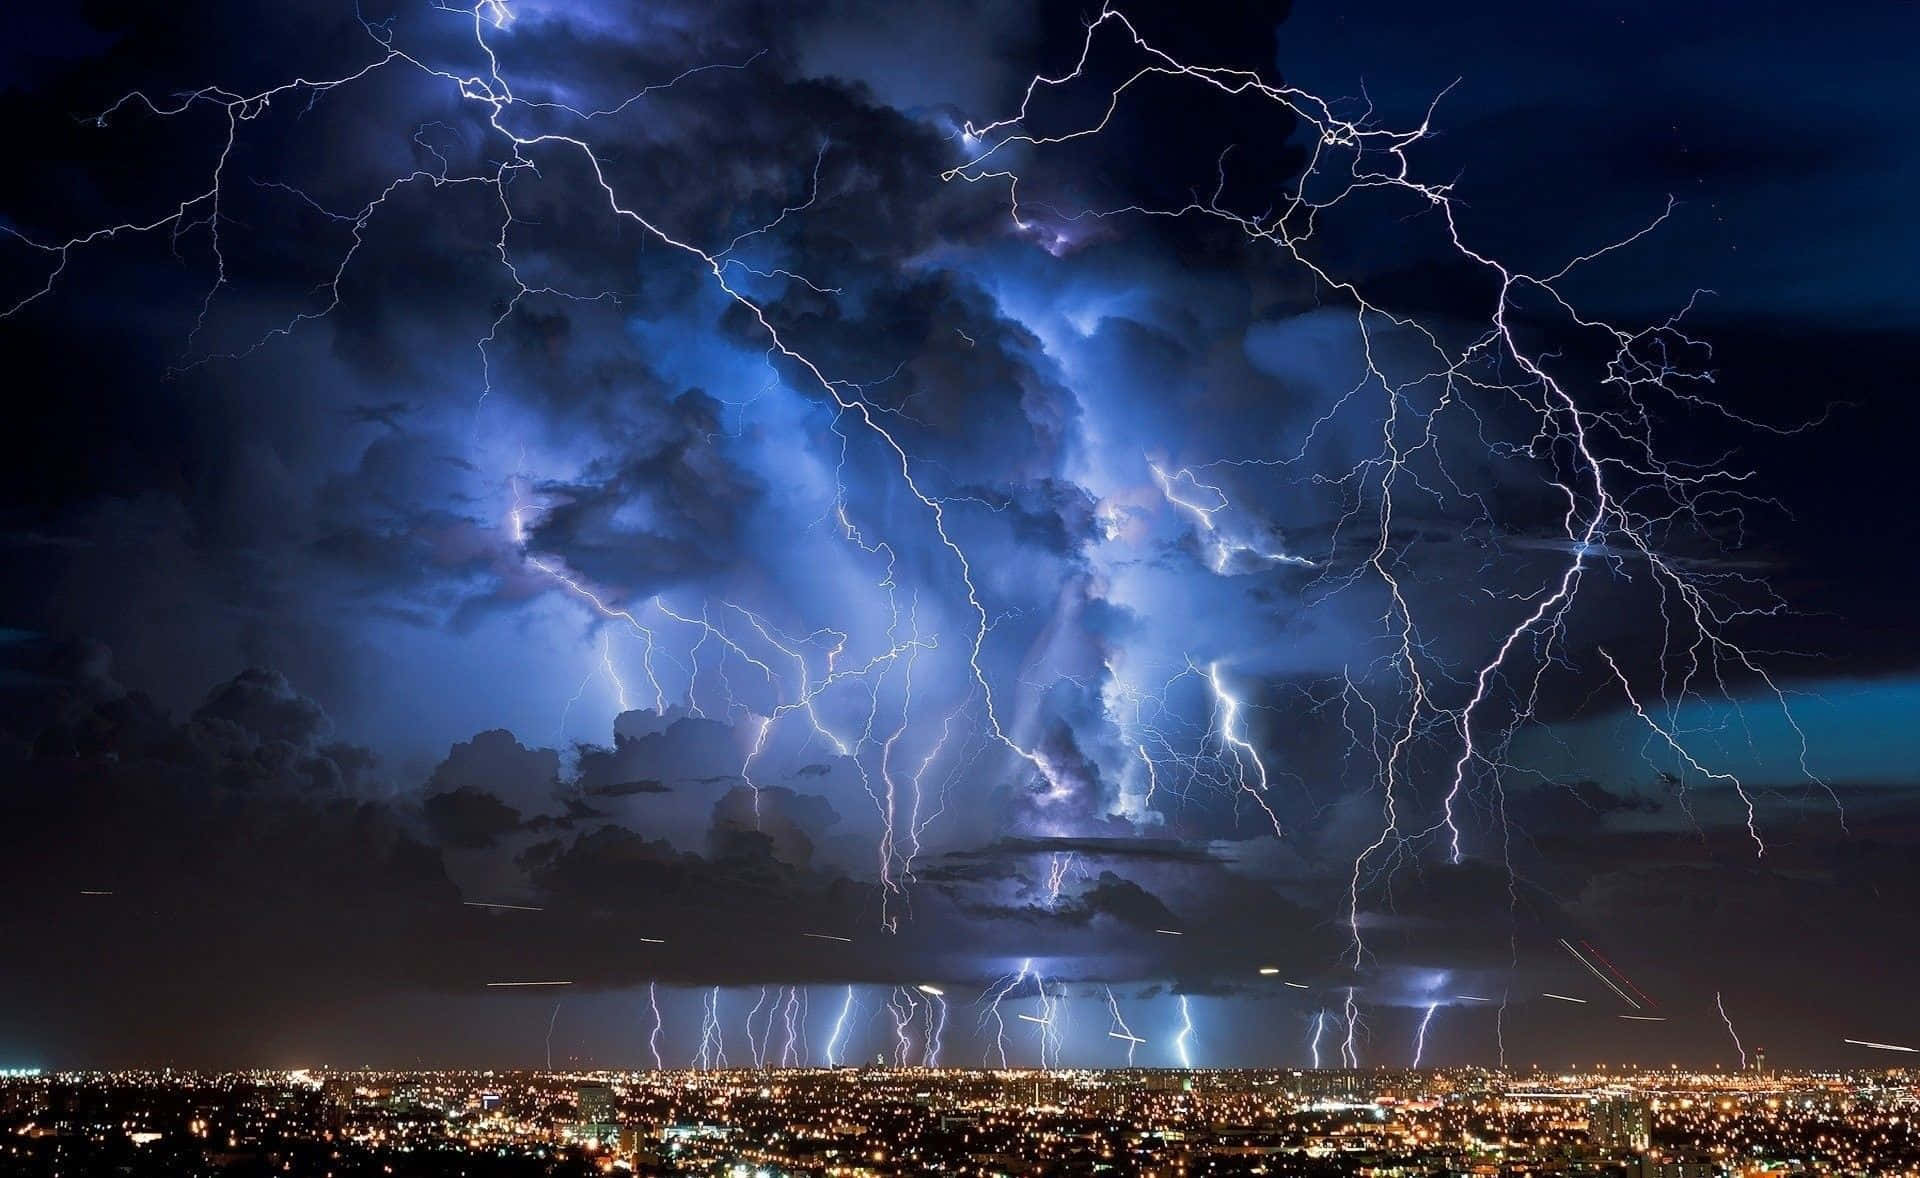 Cool Lightning Over City View Wallpaper